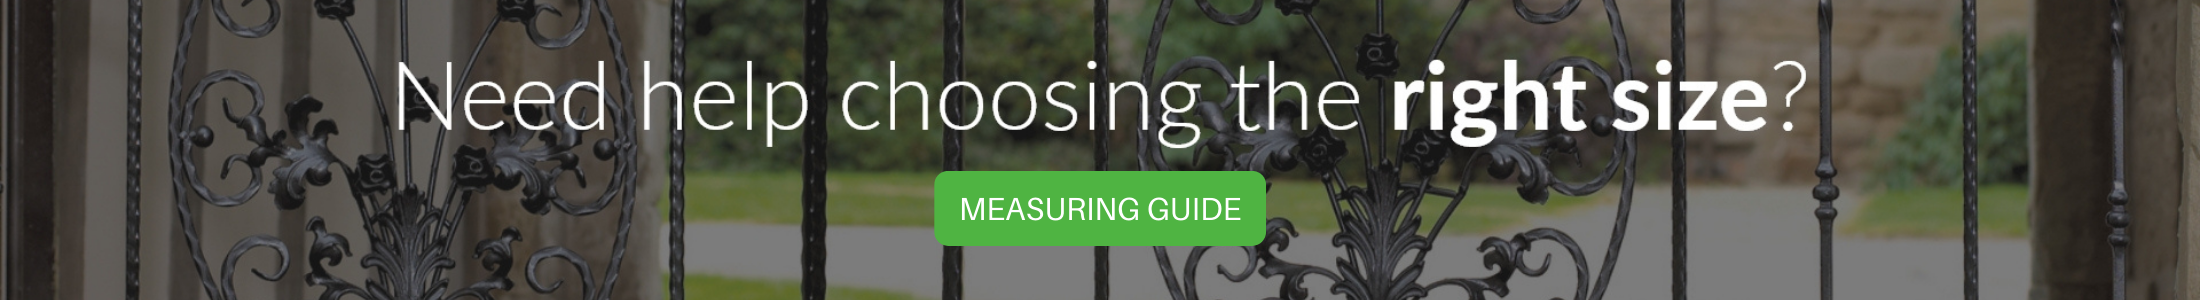 Go to the measuring guide if you need help with choosing the right size